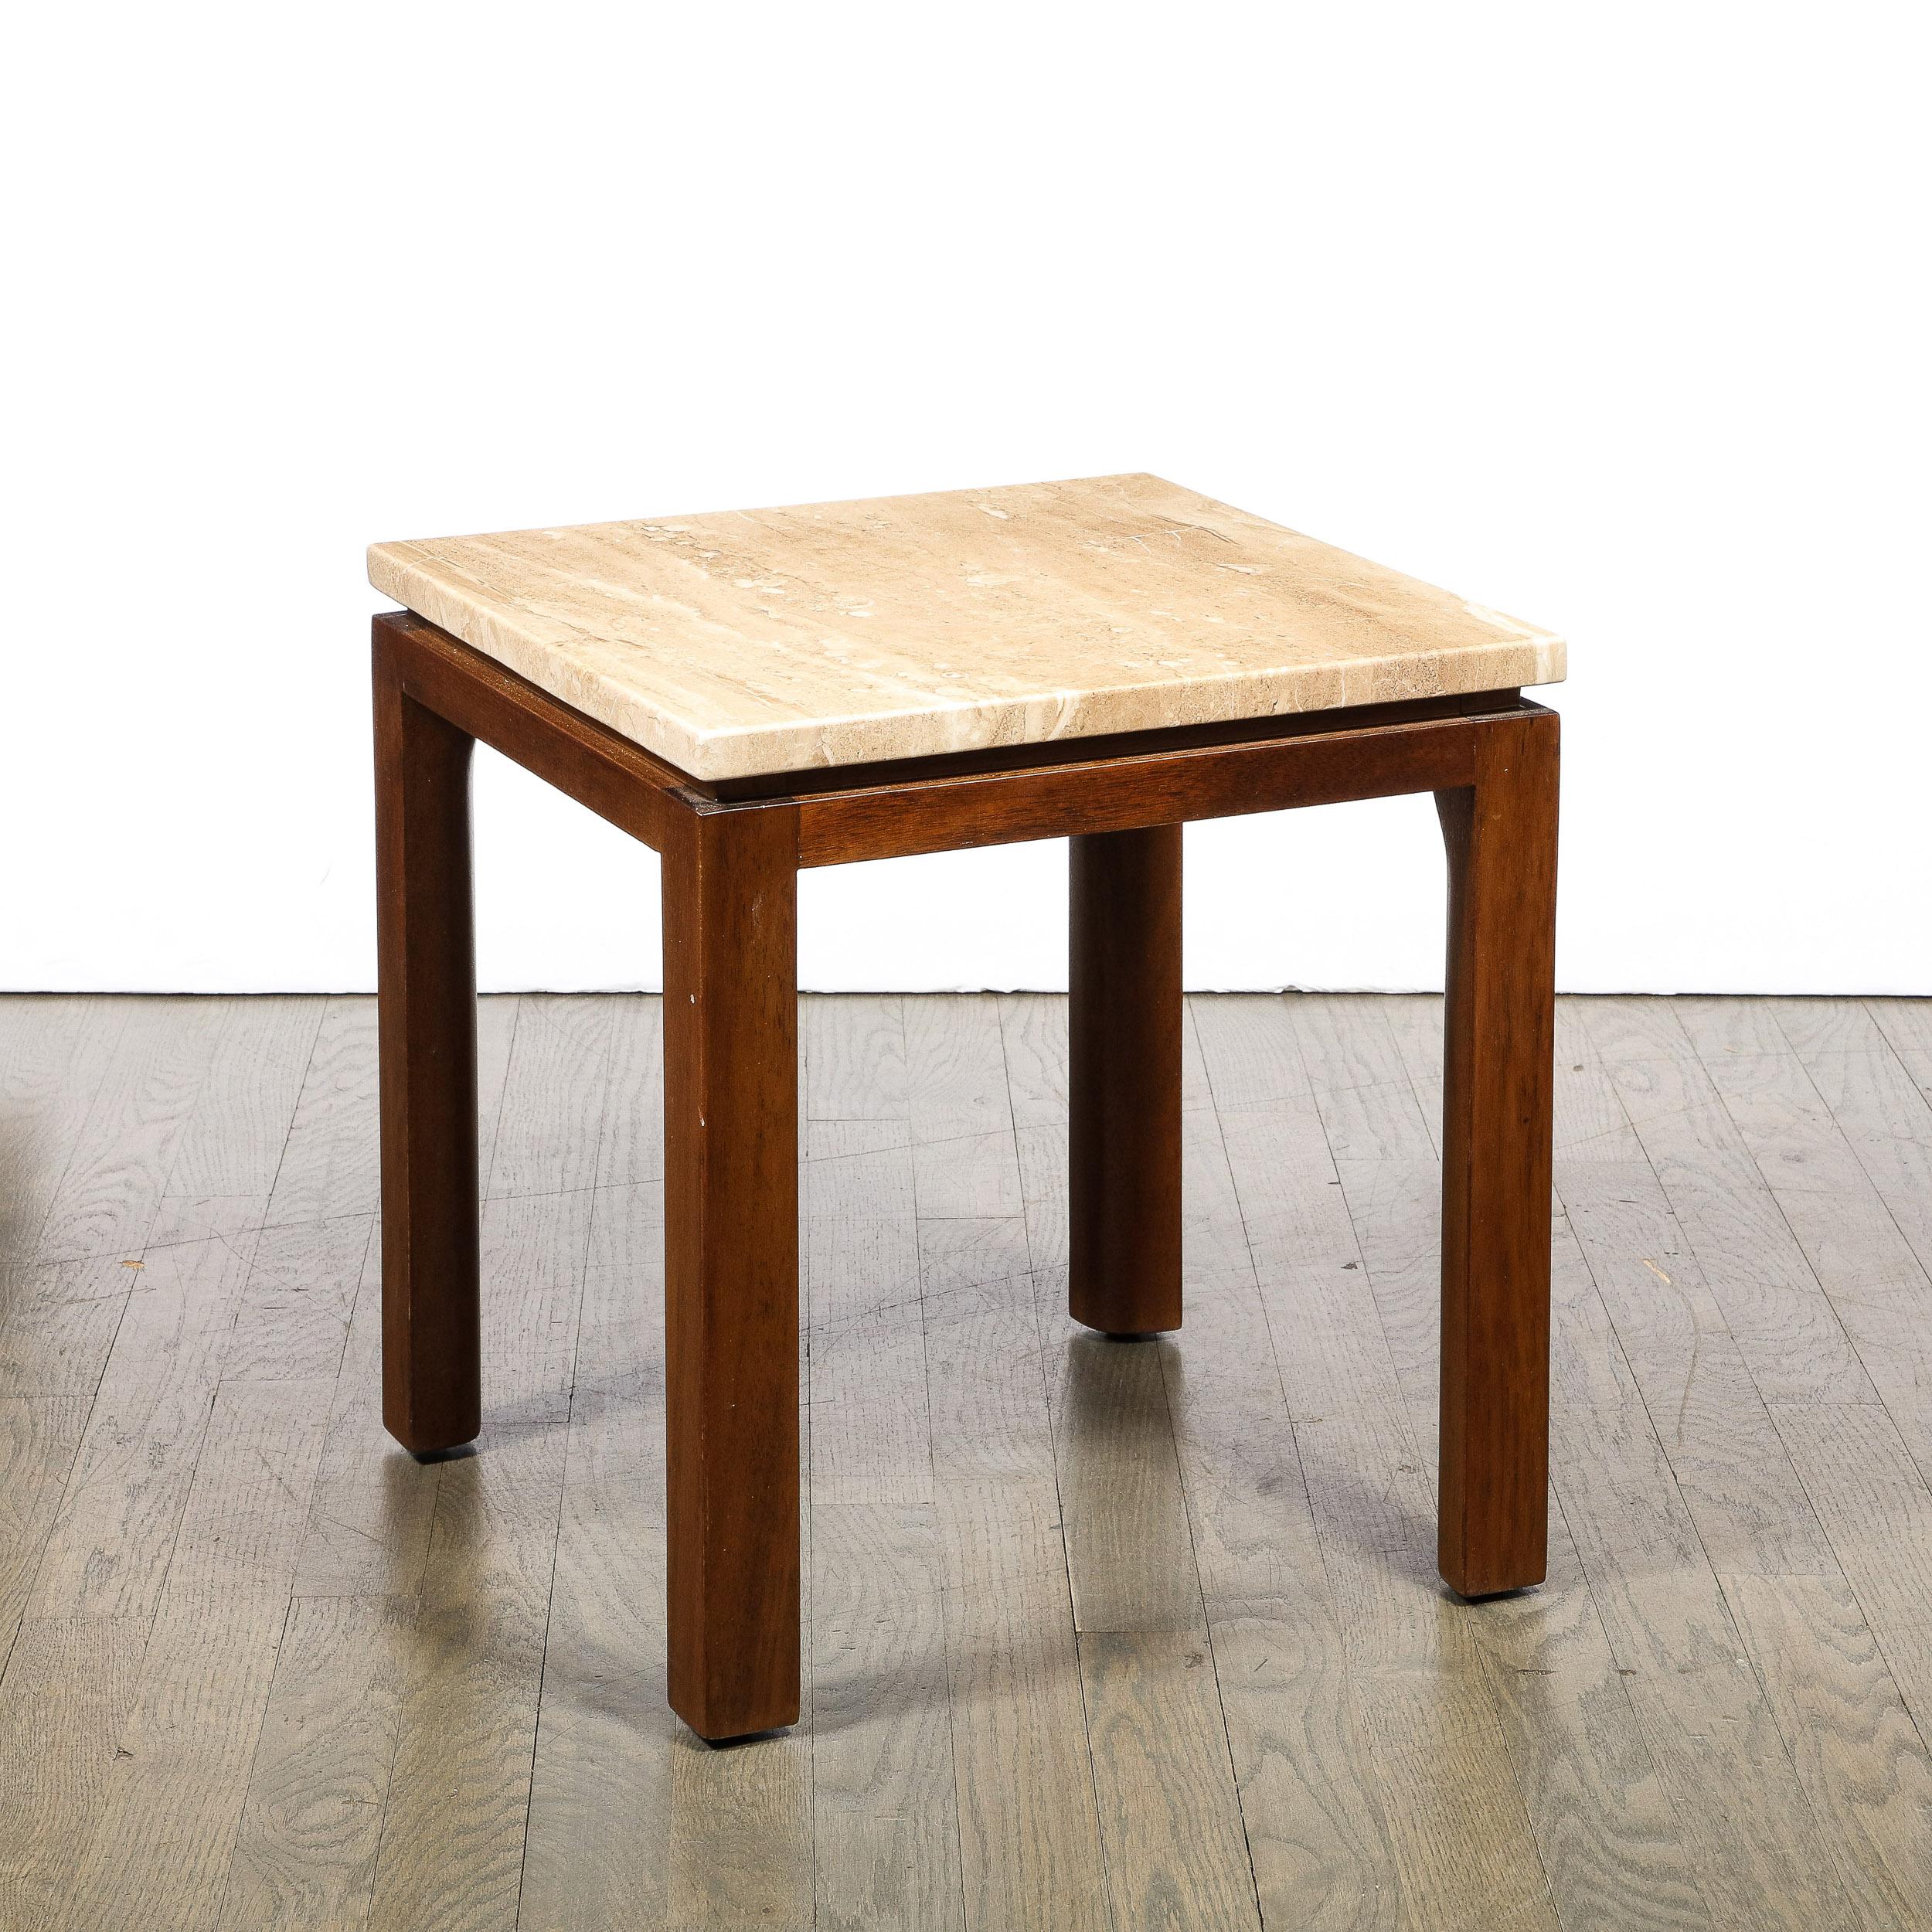 Mid-20th Century Mid-Century Modernist Side Table in Walnut & Travertine Marble by Harvey Probber For Sale